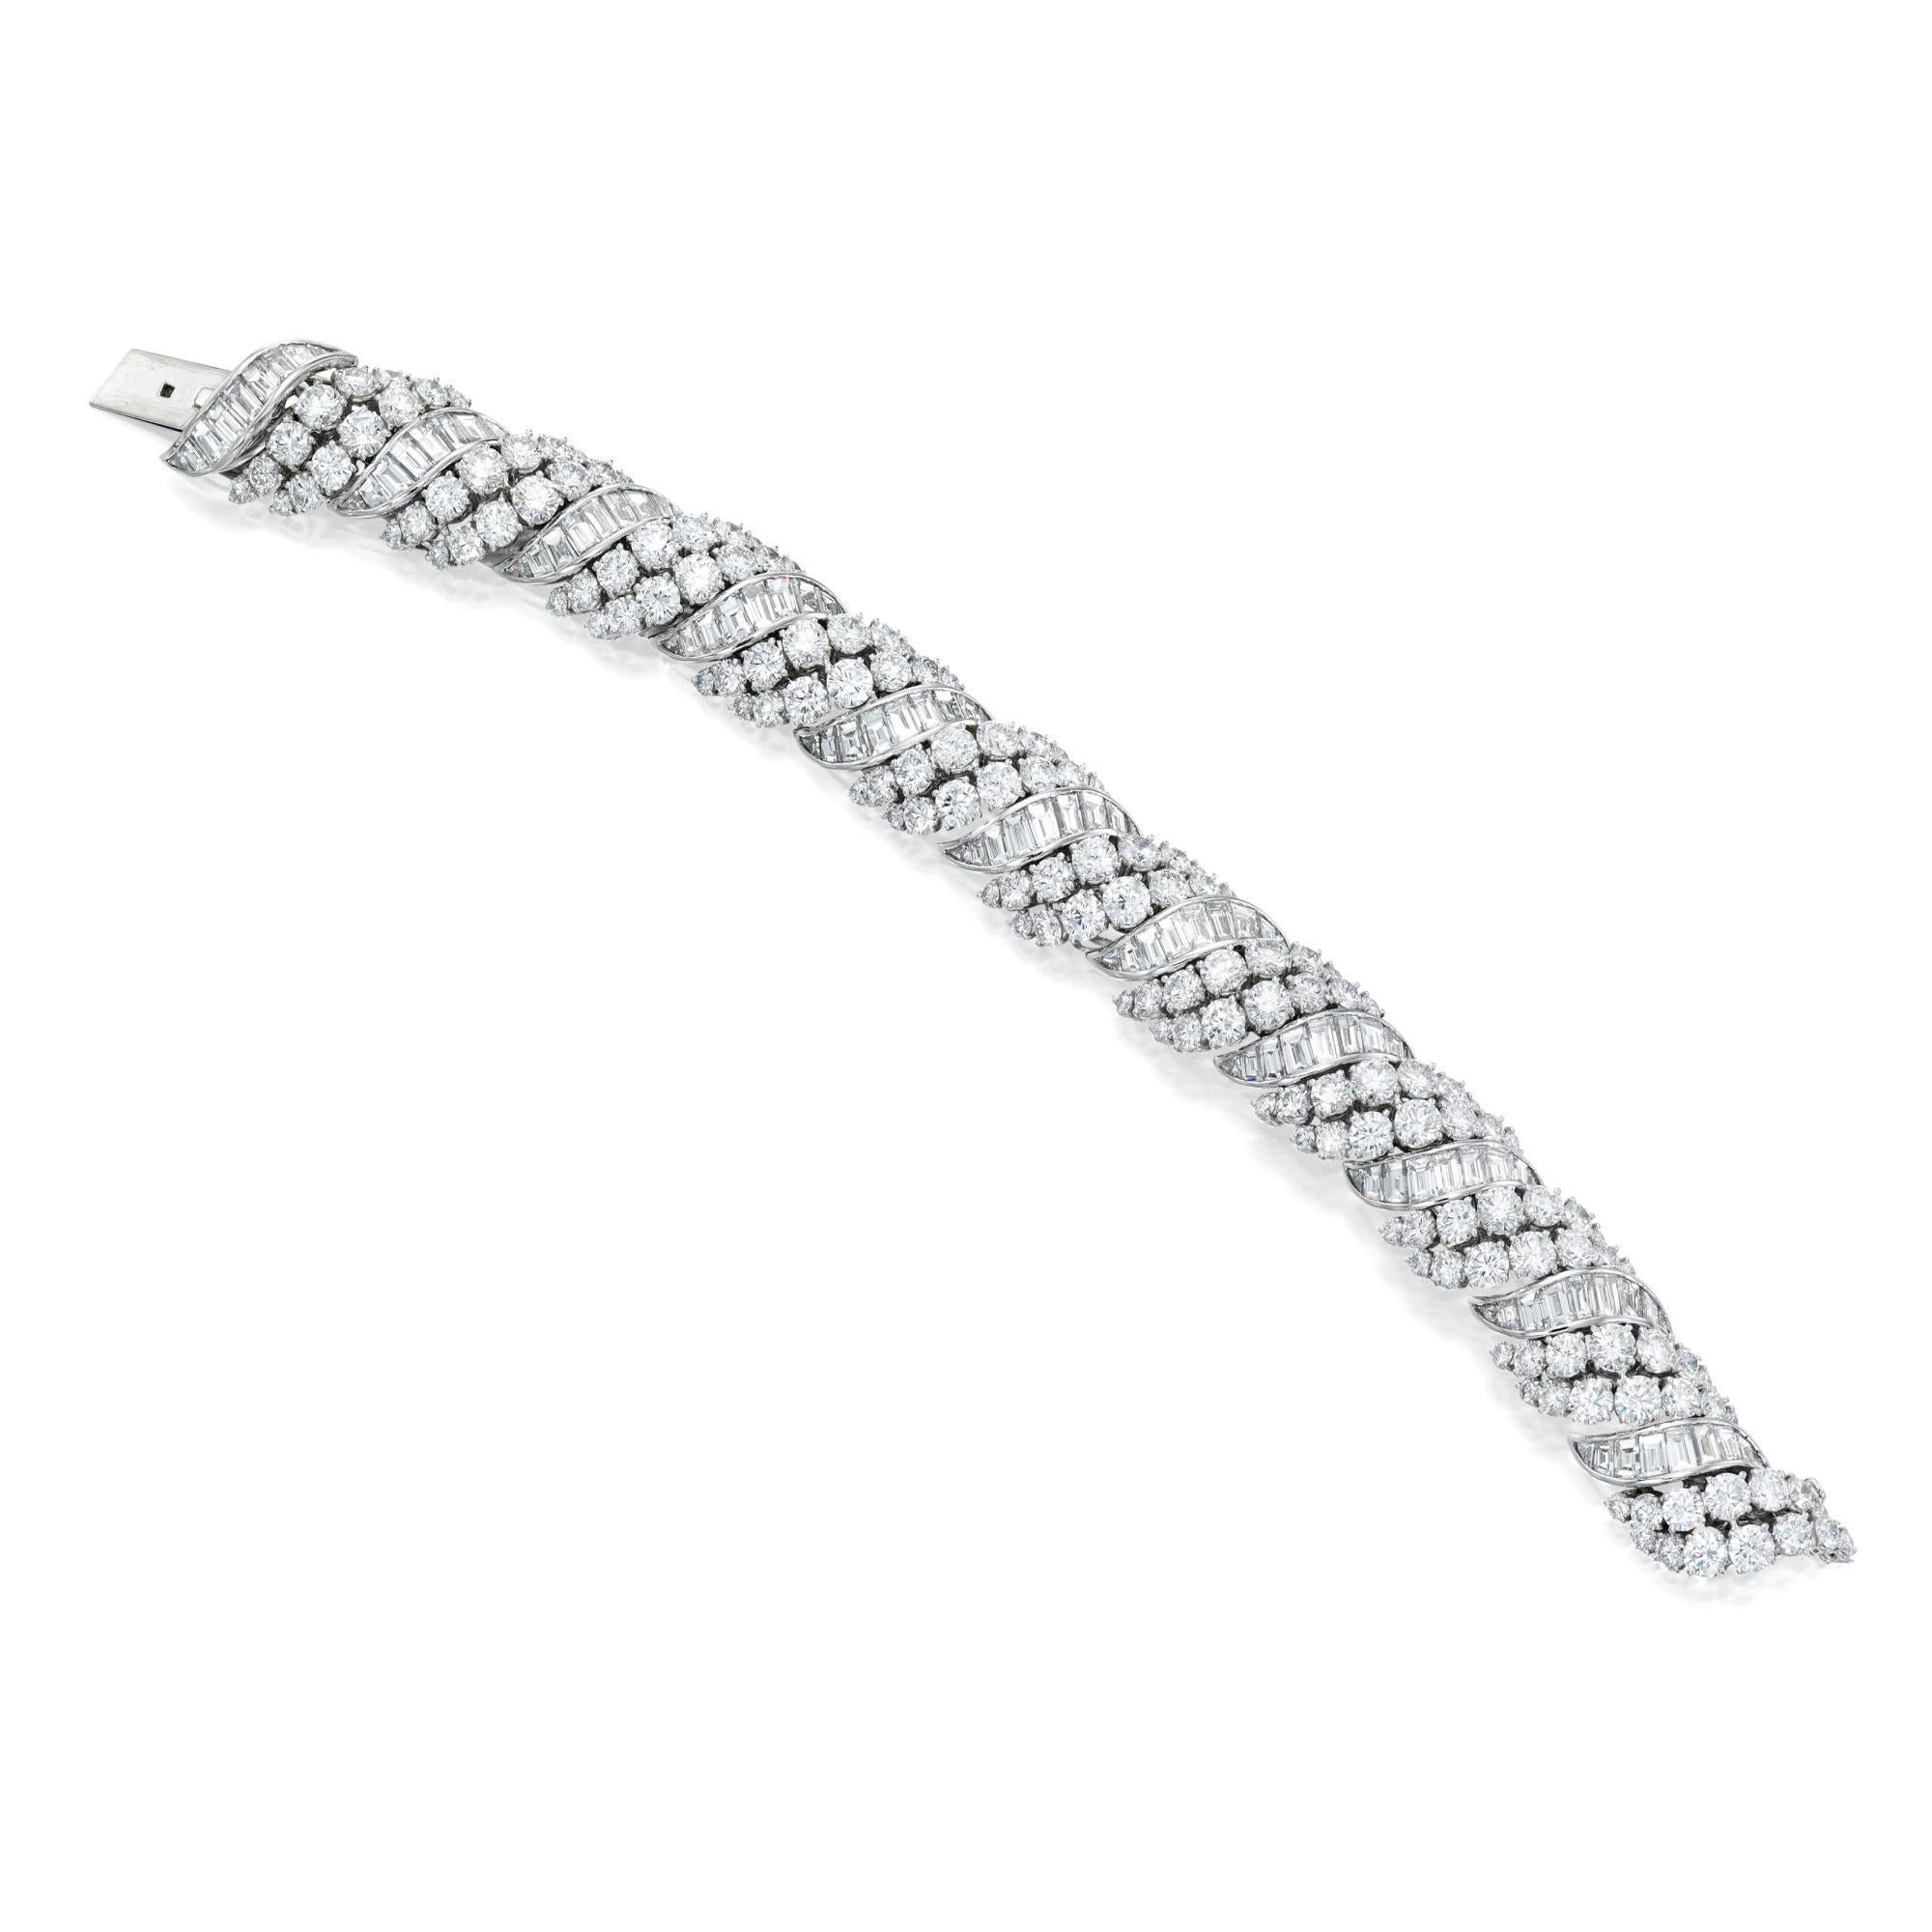 34 Carat Diamond Platinum Scroll Bracelet In Excellent Condition For Sale In New York, NY